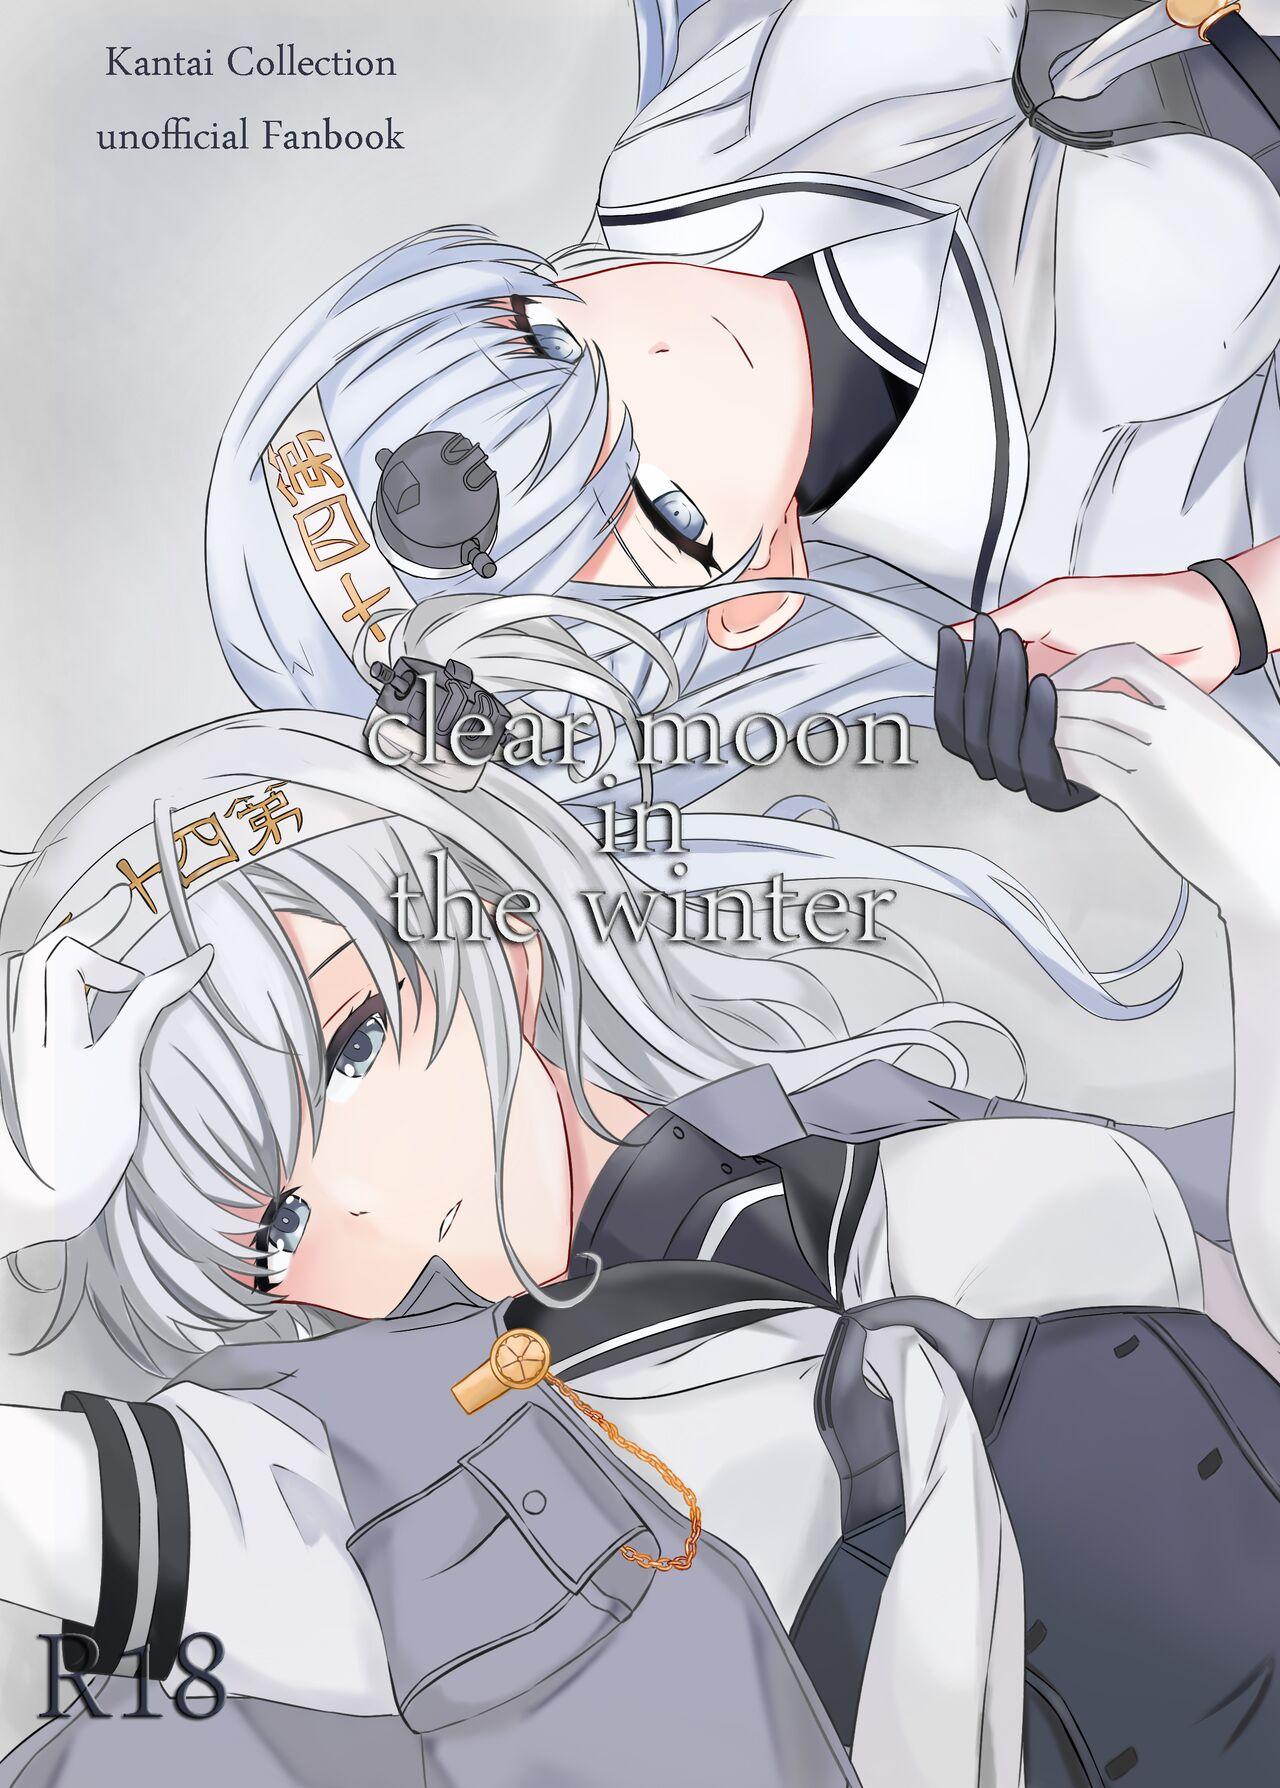 Blowjobs clear moon in the winter | 冬日清月 - Kantai collection Cum In Mouth - Picture 2